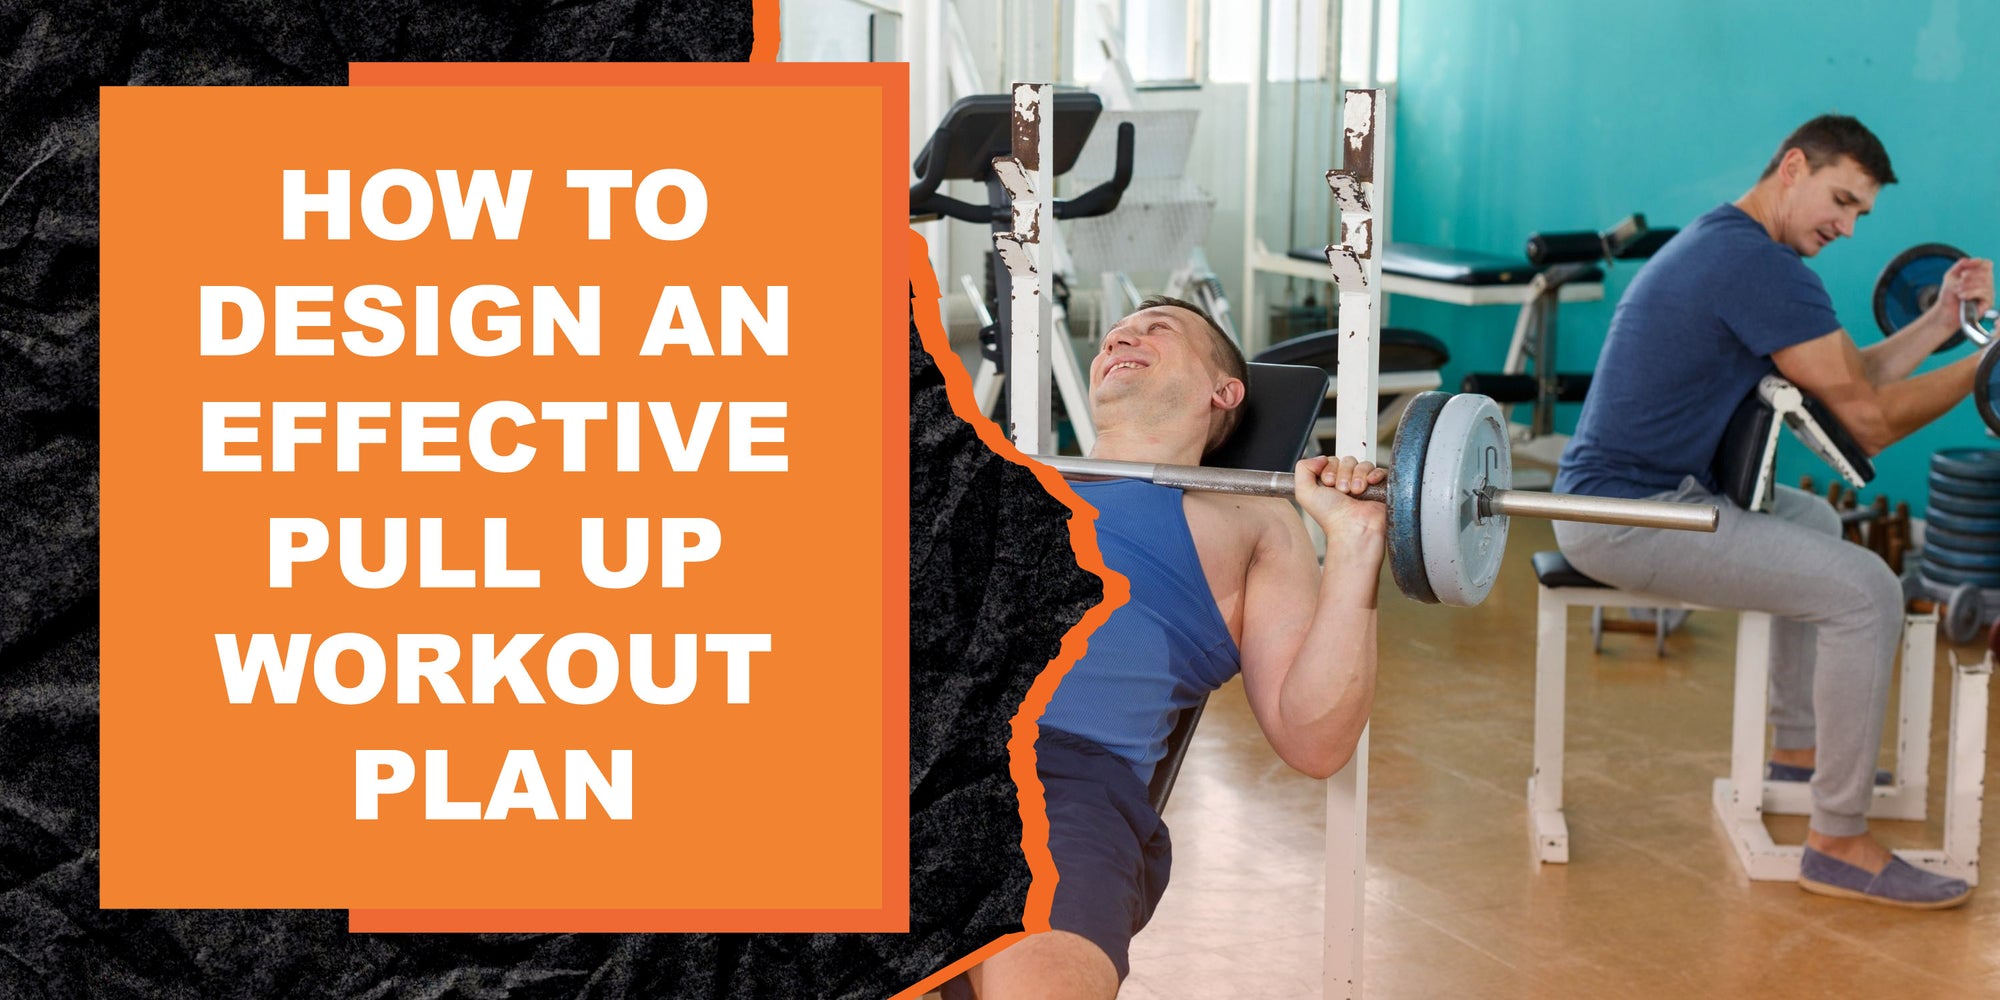 How to Design an Effective Pull Up Workout Plan